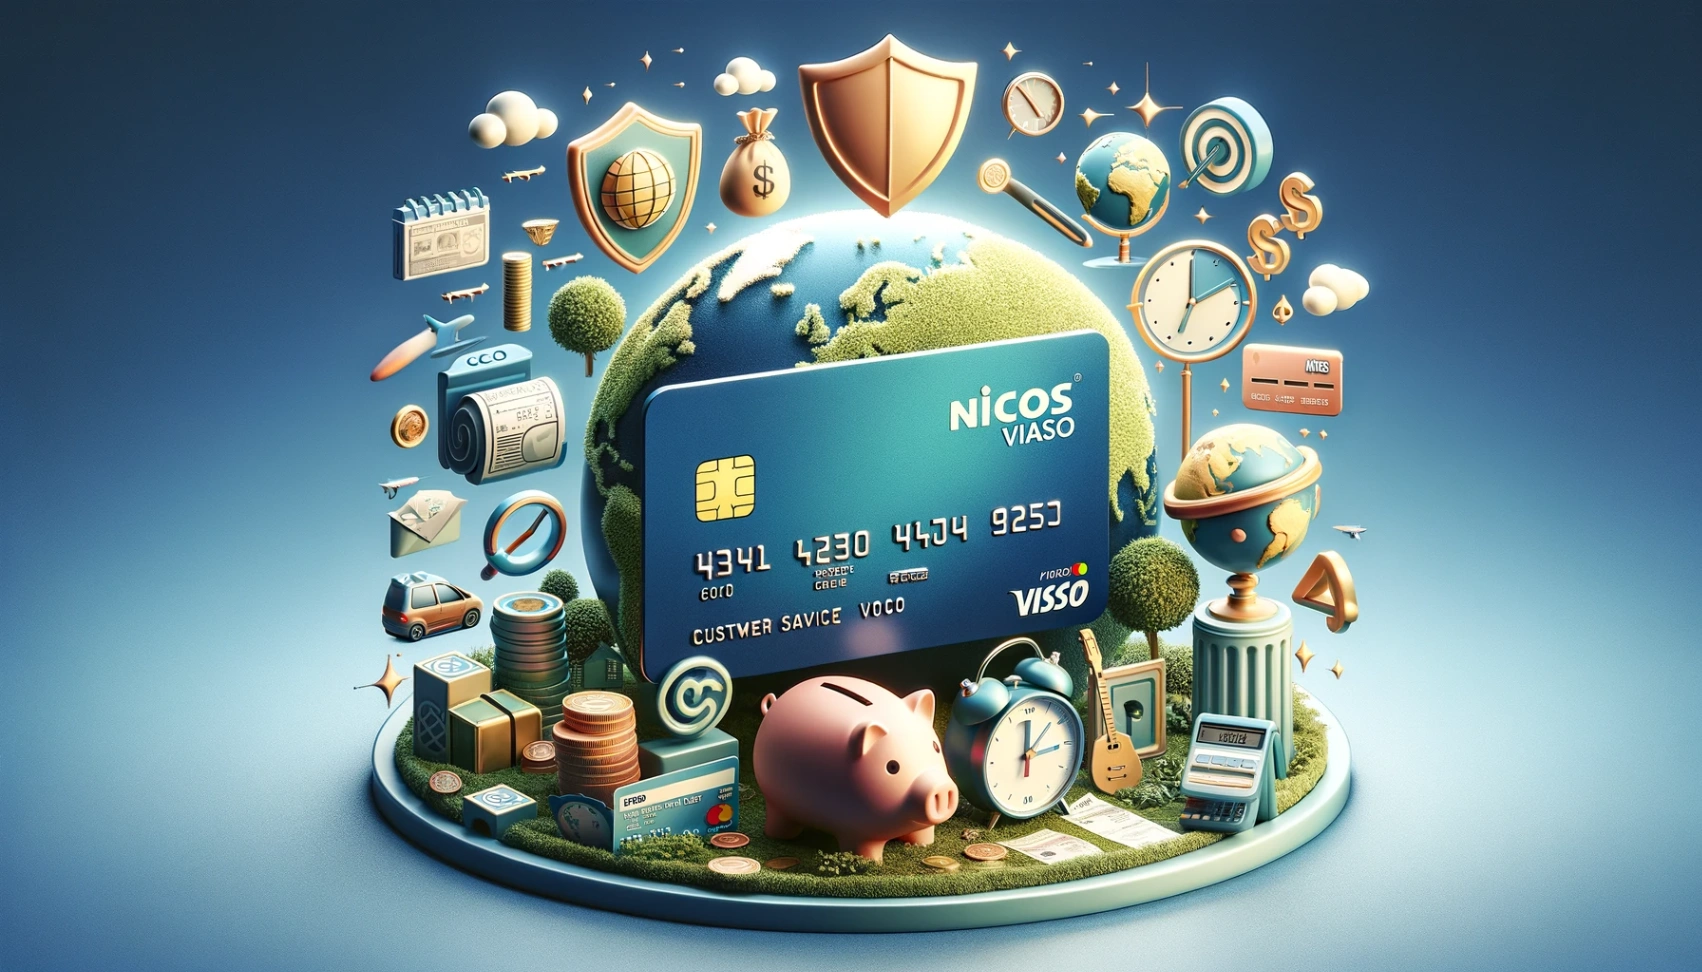 Nicos Viaso Credit Card: Learn How to Apply Now